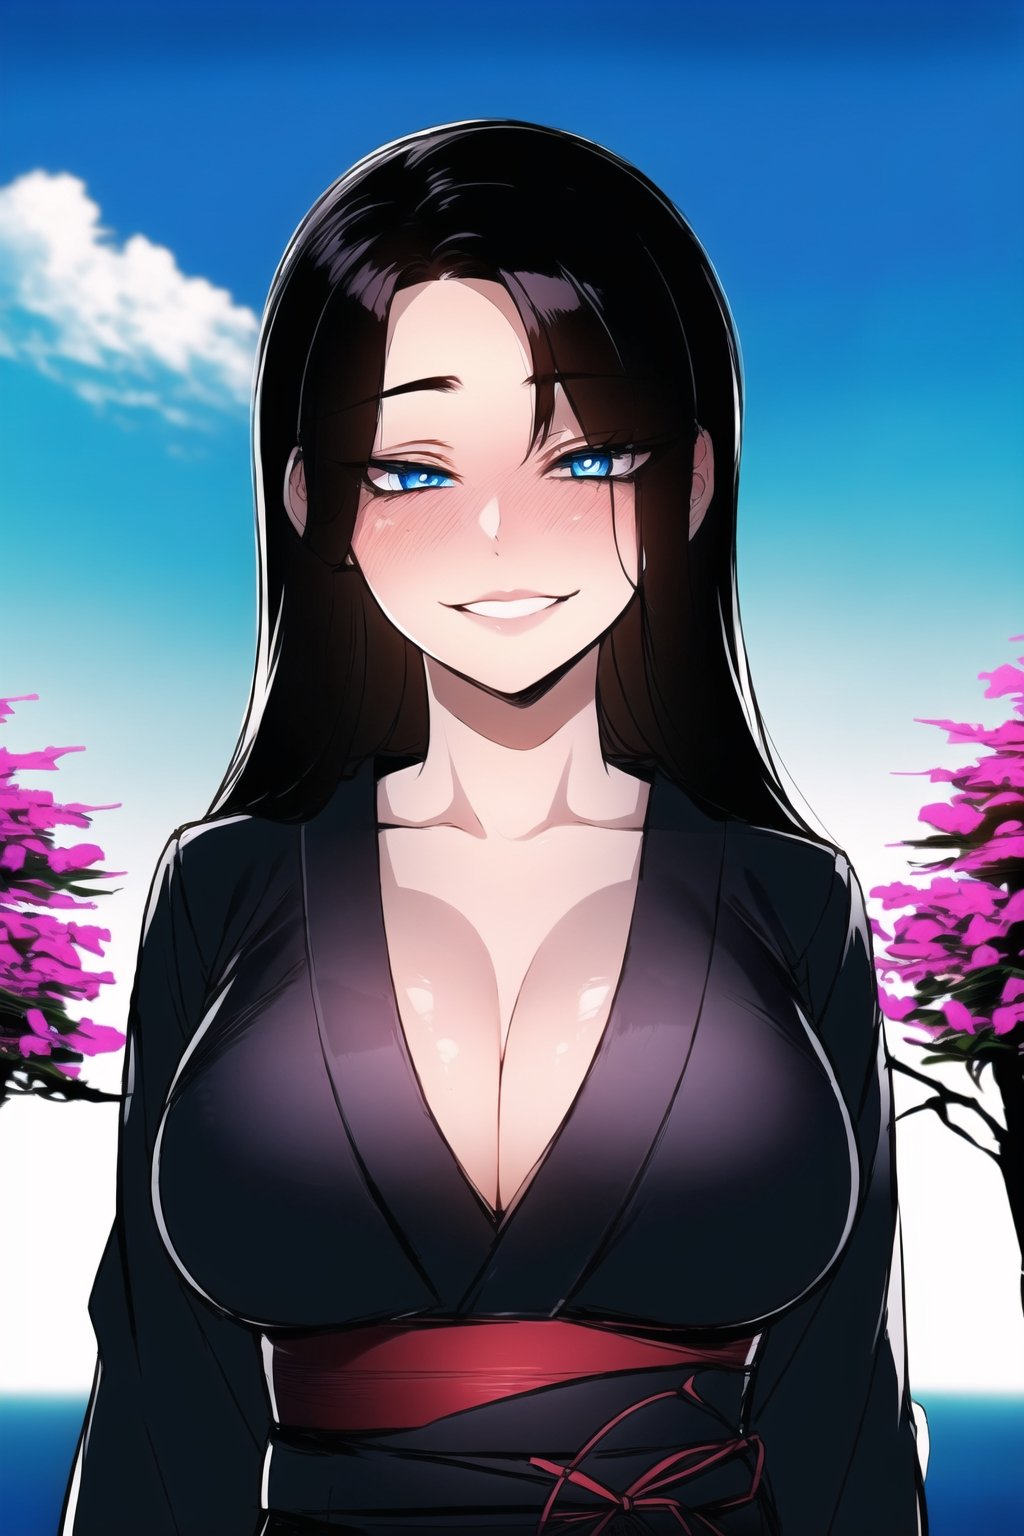 1girl(skinny body, young, 20 years old, long black hair, blue eyes, wearing yukata, big breasts), staring at you seductively with a smile on her face, upper body, background(day, outdoor, sky, sun, ocean, flowers, trees) (masterpiece, highres, high quality:1.2), ambient occlusion, outstanding colors, low saturation,High detailed, Detailedface, Dreamscape,ratatatat74 style